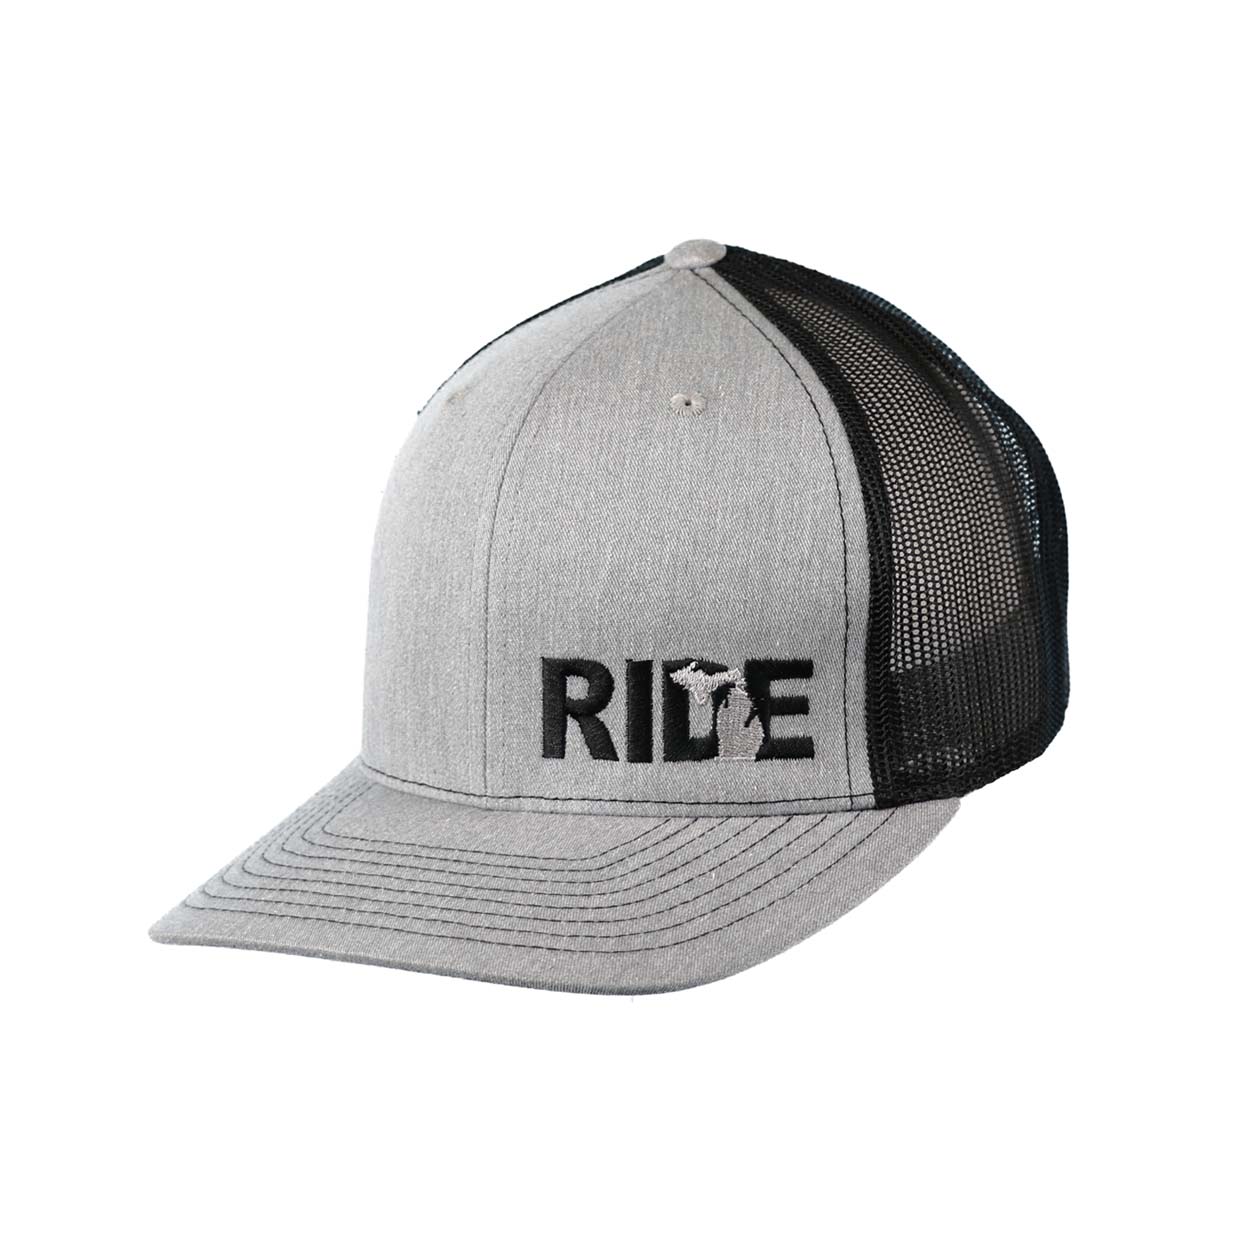 Ride Michigan Night Out Pro Embroidered Snapback Trucker Hat Heather Gray/Black